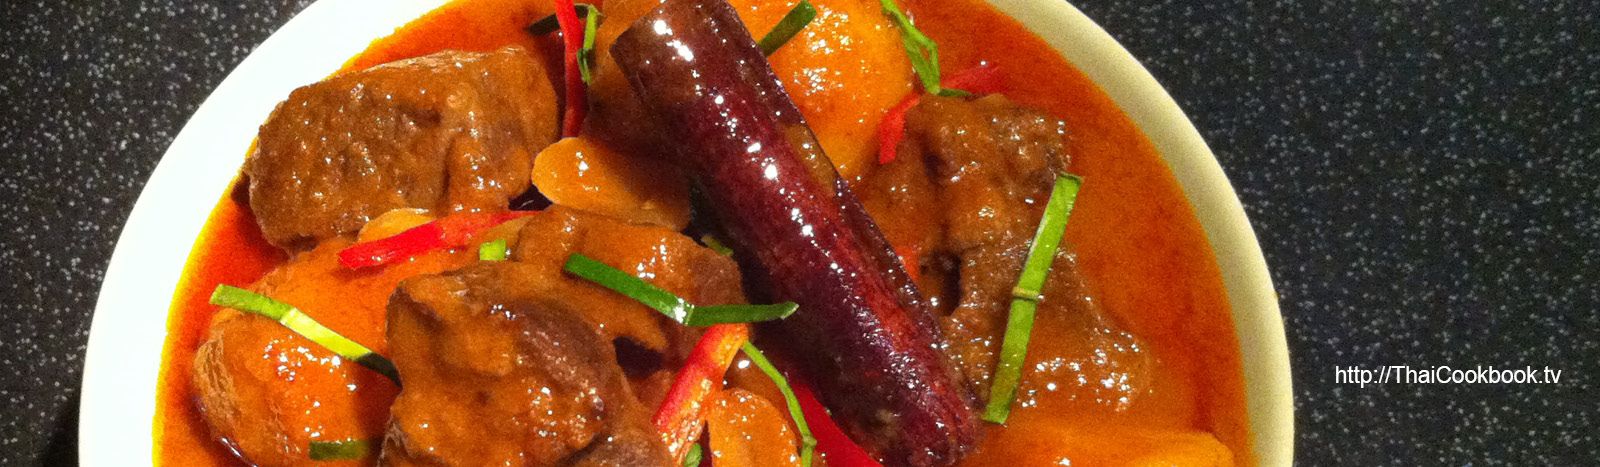 Authentic Thai recipe for Massaman Curry with Beef